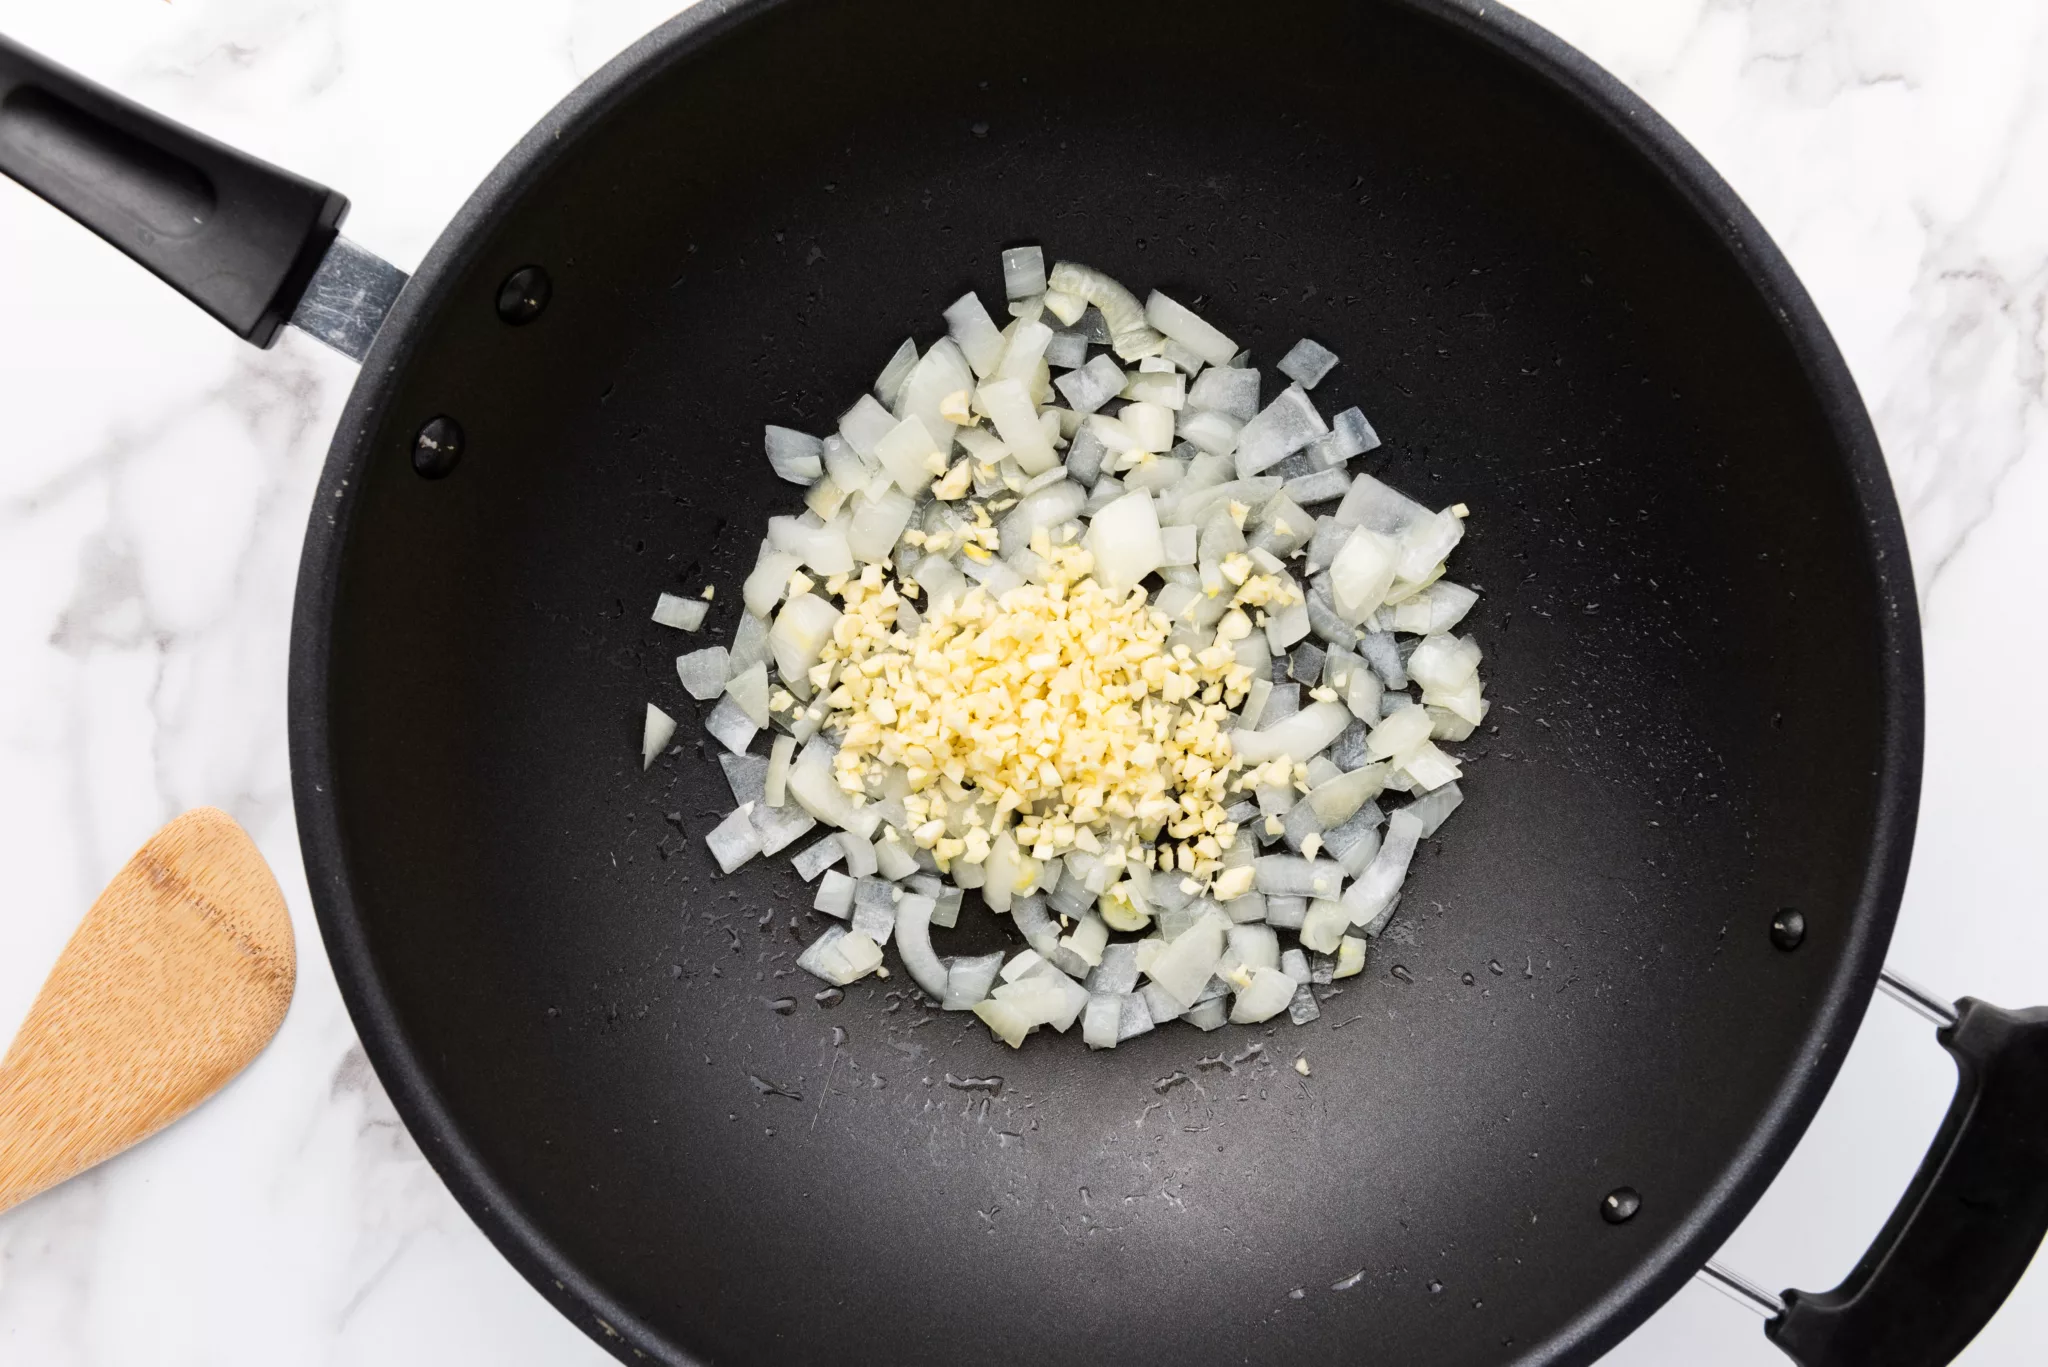 diced onions and minced garlic in a frying pan